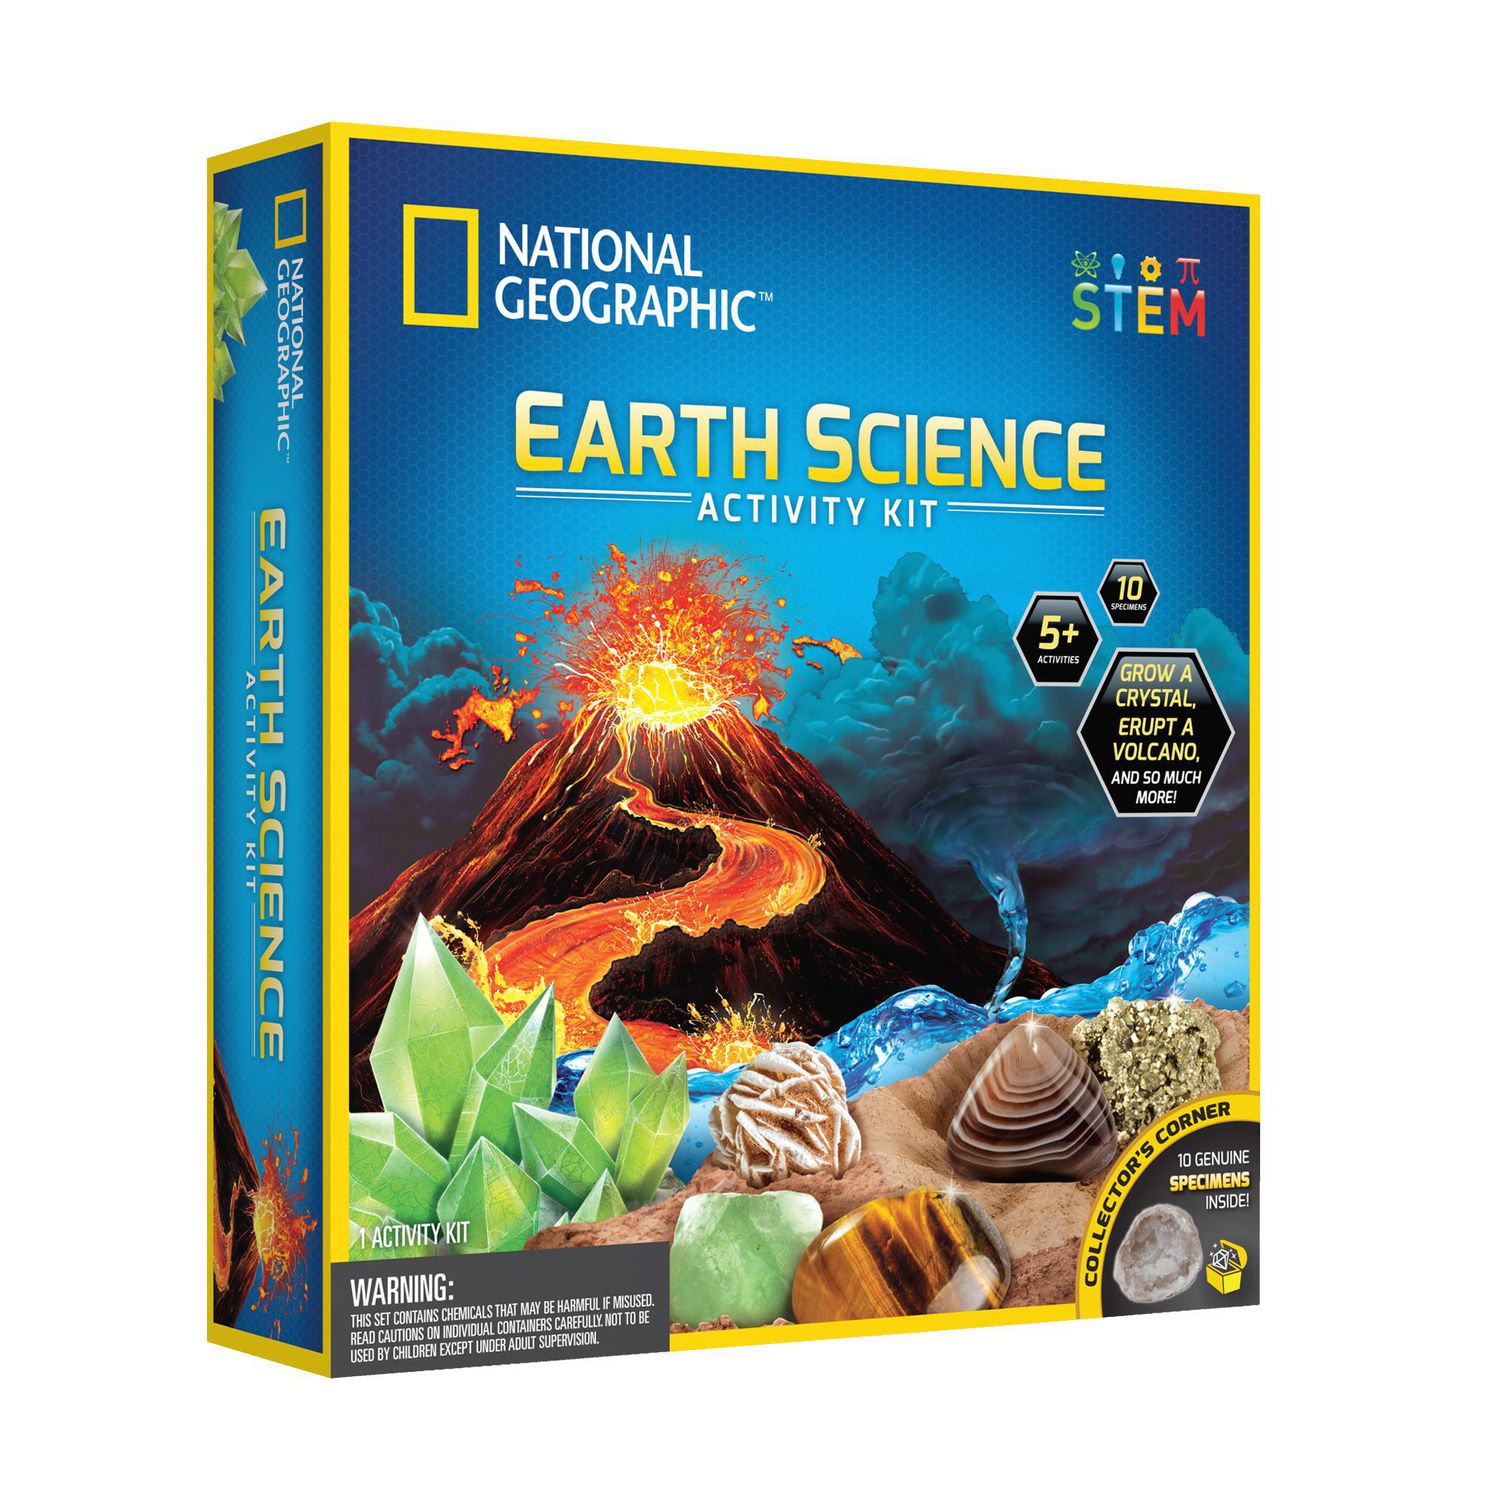 National Geographic Earth Science Activity Kit for Kids, STEM